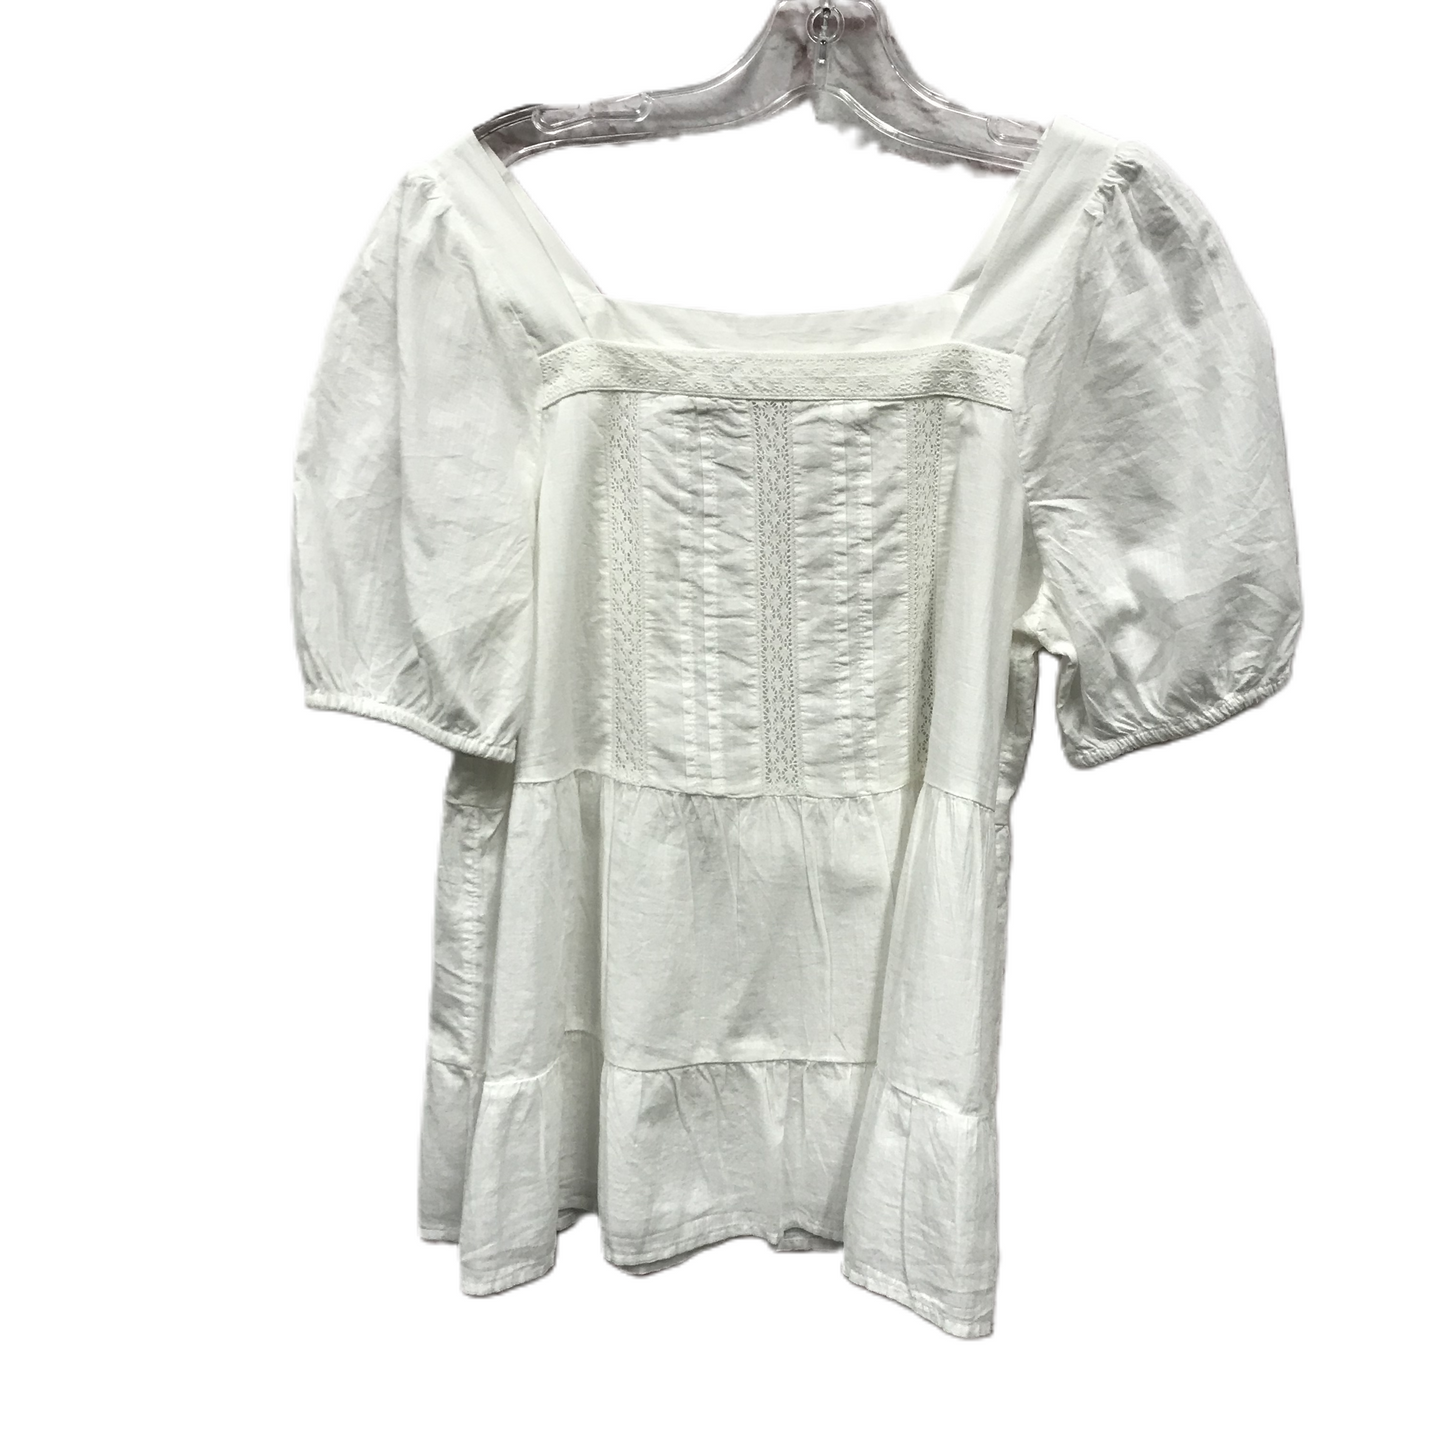 White Top Short Sleeve By Loft, Size: S